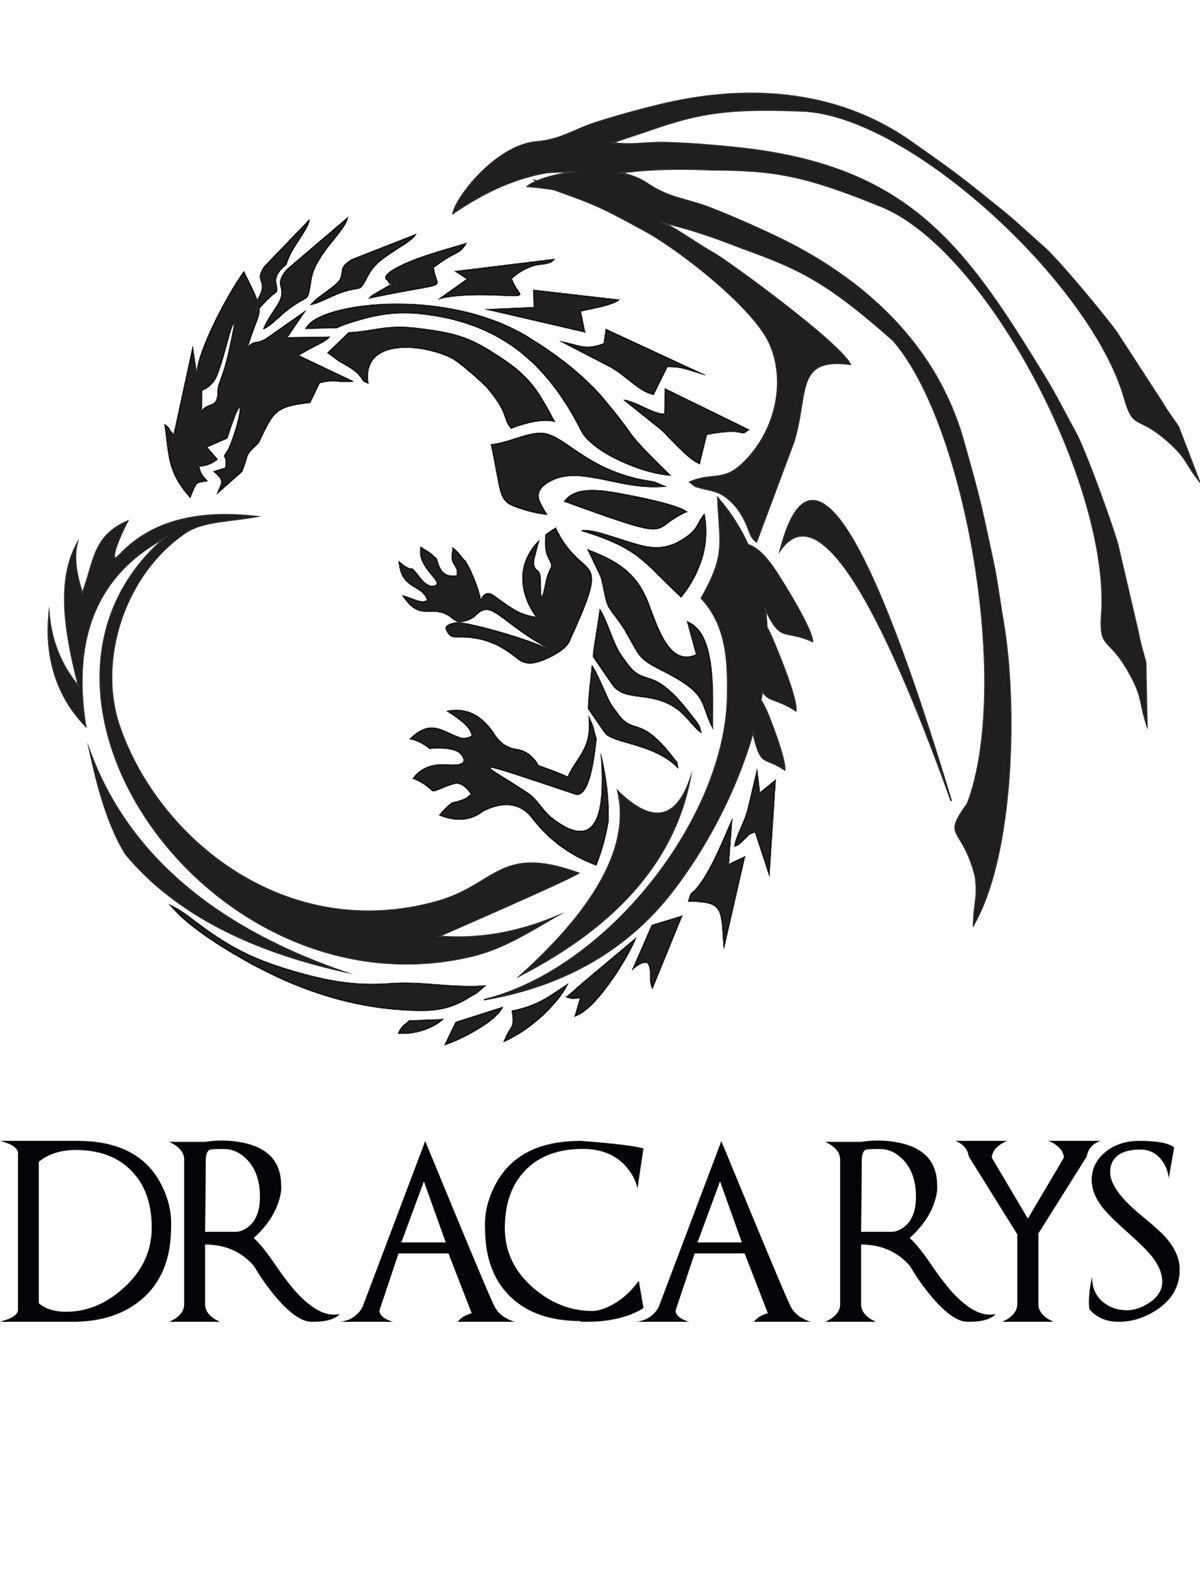 Dracarys. Game of thrones tattoo, Game of thrones artwork, Game